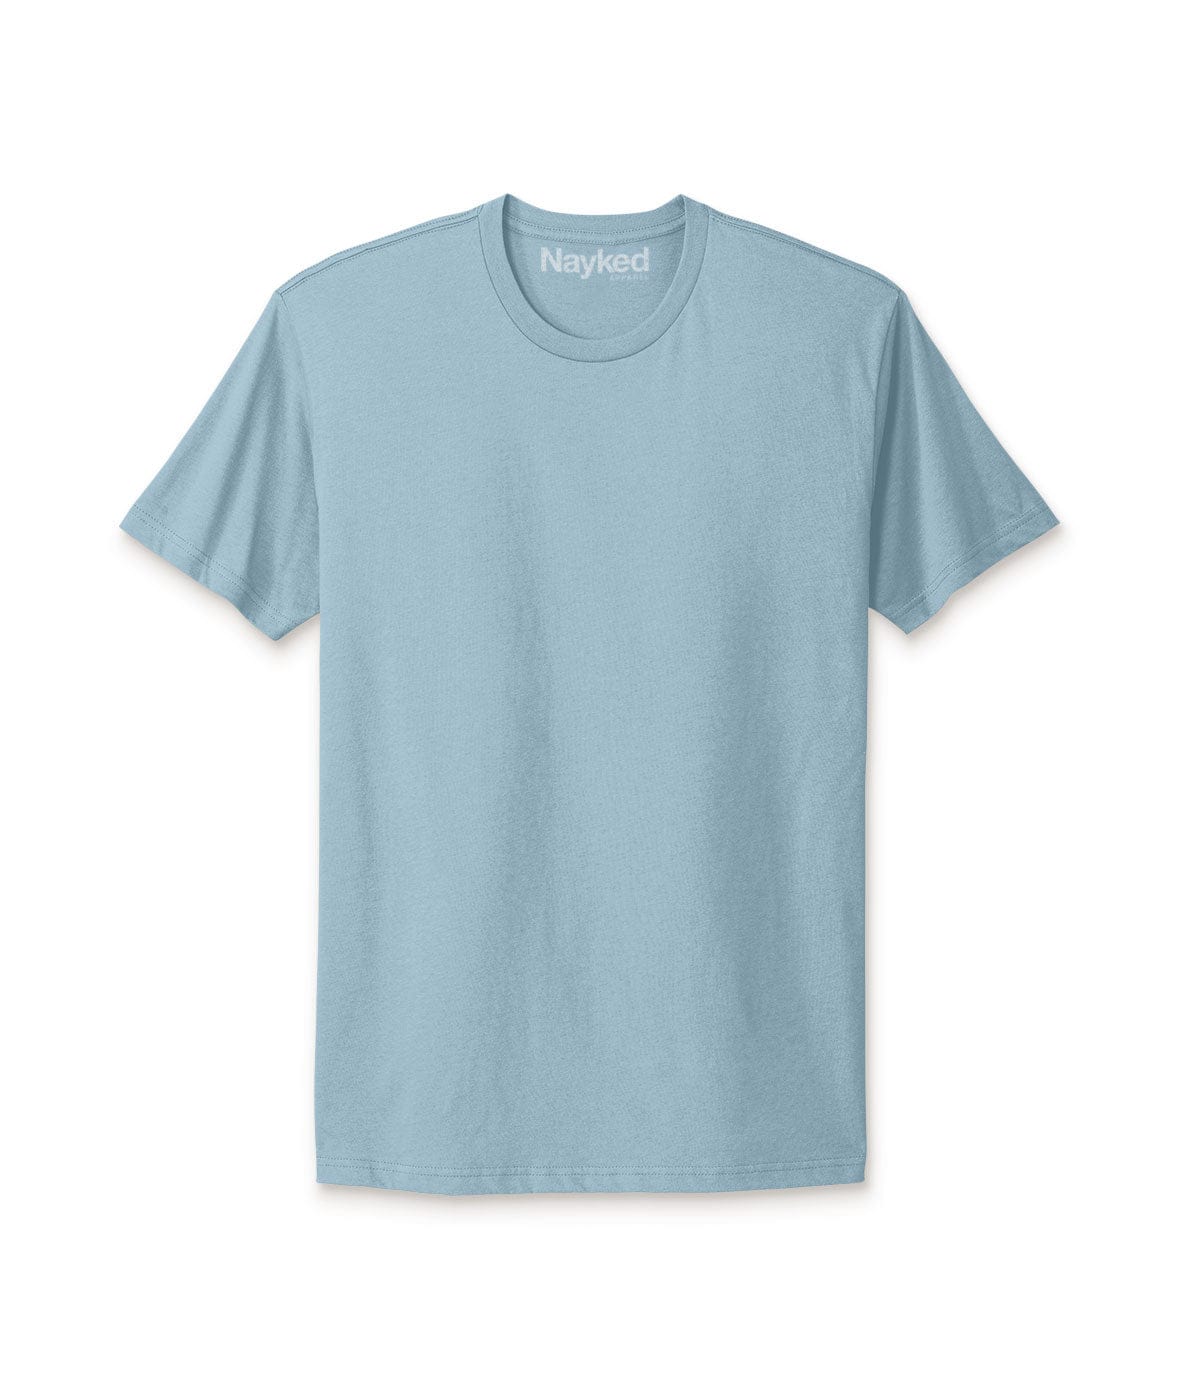 Shop Nayked Apparel Men's Ridiculously Soft Big 100% Cotton Sleeve Crew Neck T-Shirt Comfort Tops, T-Shirts.